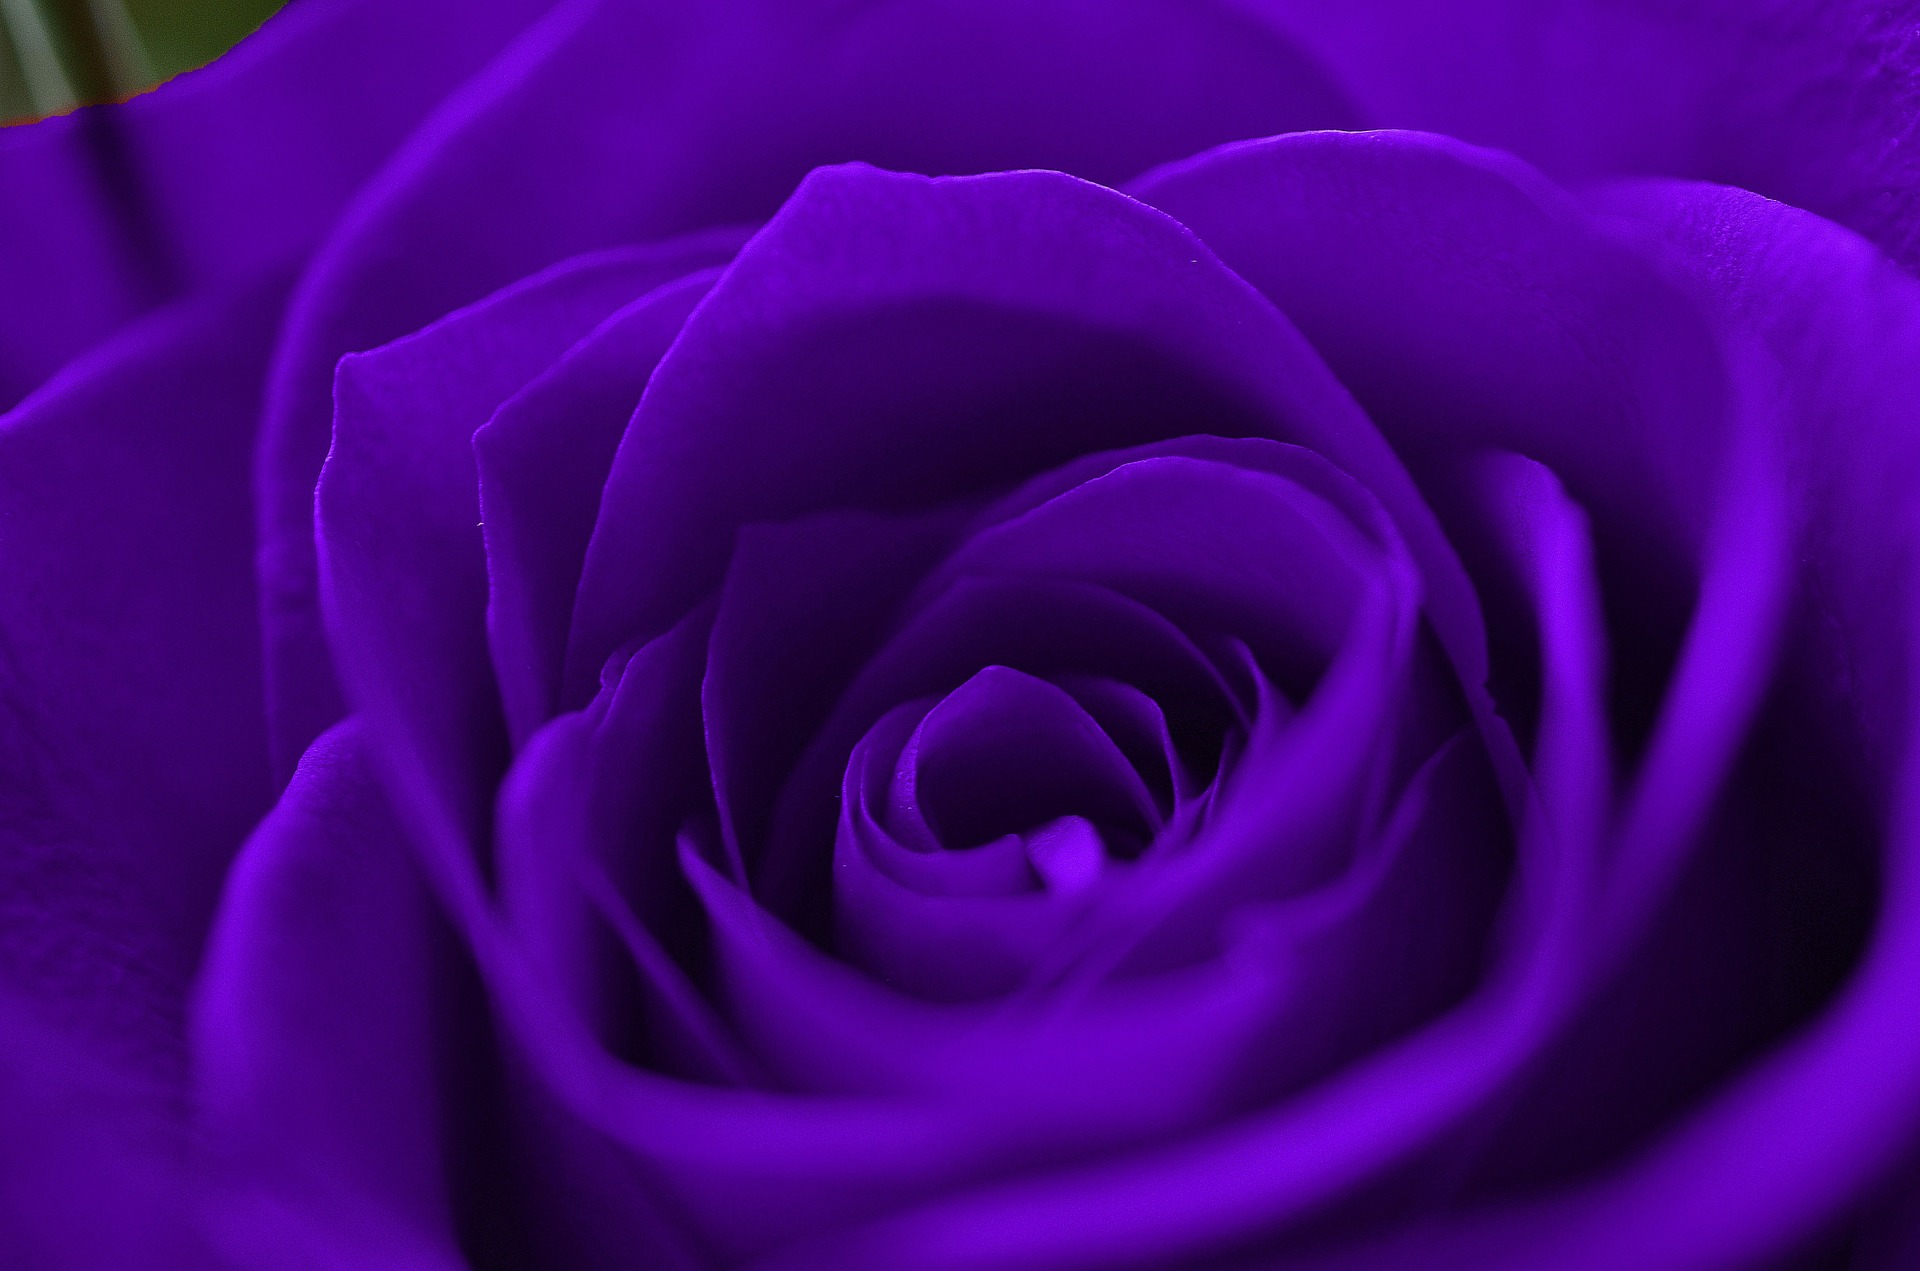 July By Admin Ments Off On HD Wallpaper 1080p Purple Rose